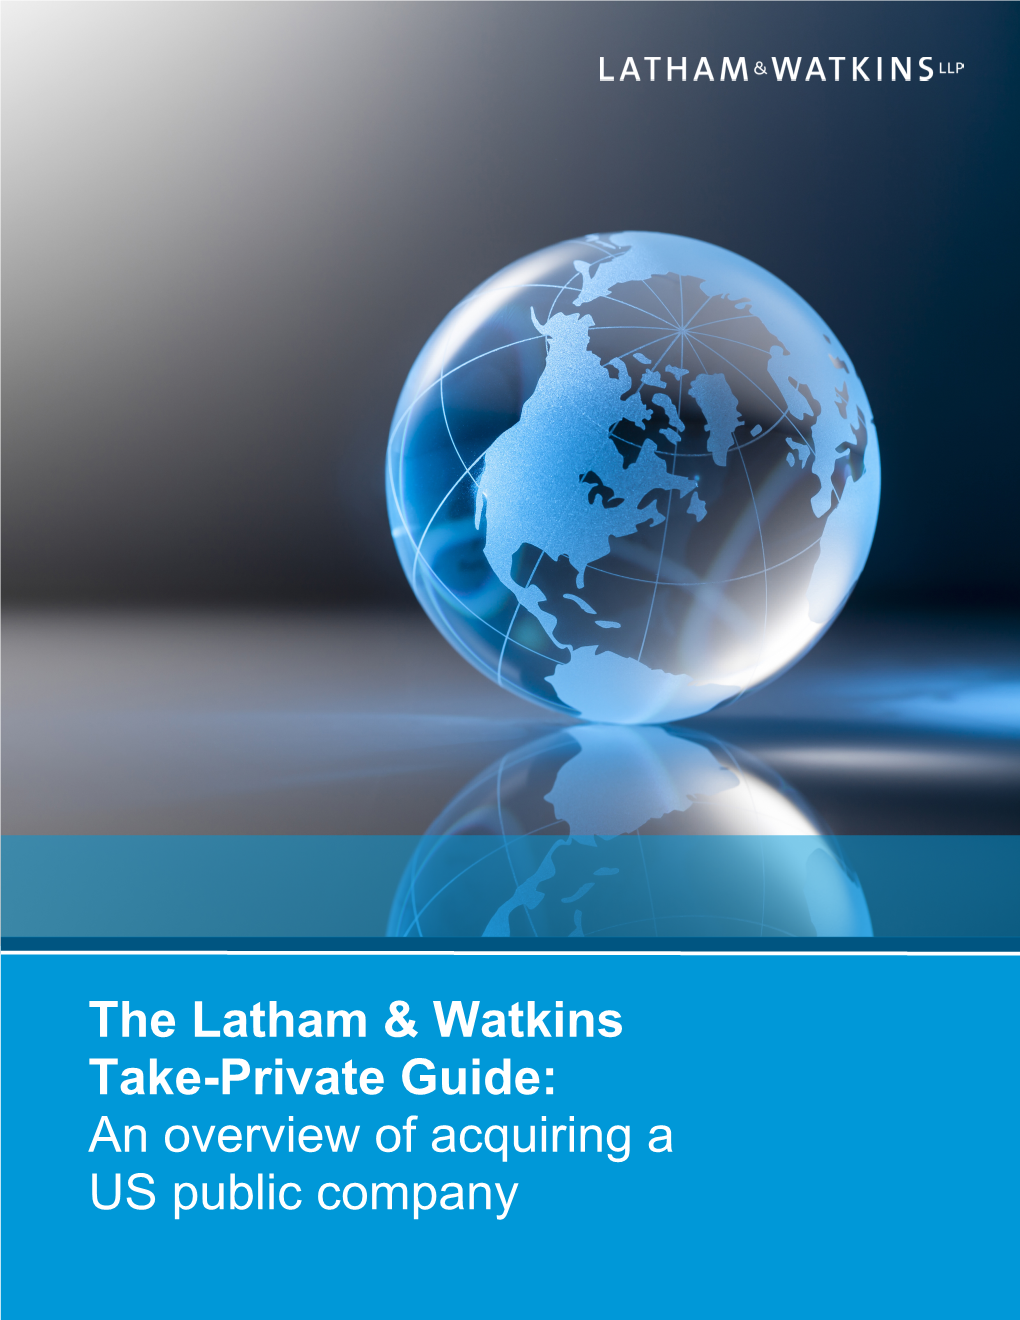 The Latham & Watkins Take-Private Guide: an Overview of Acquiring A